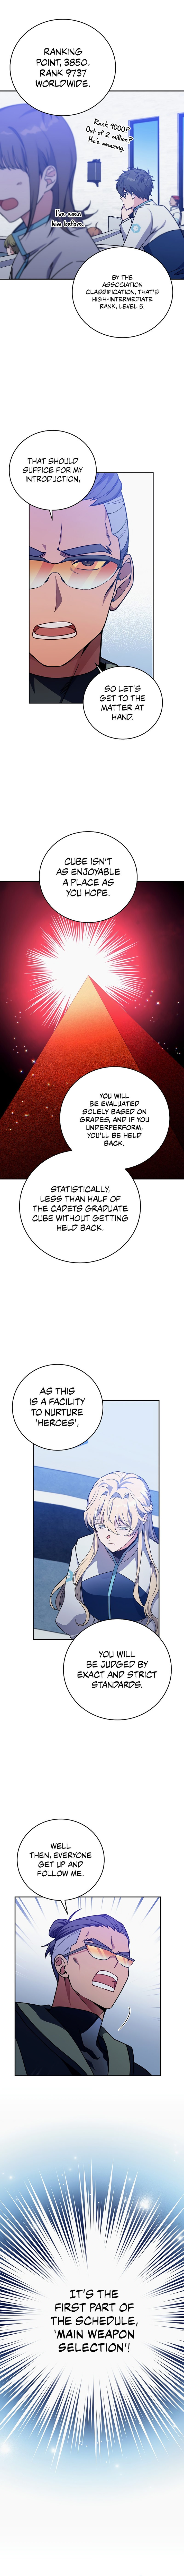 the-novels-extra-remake-chap-3-9